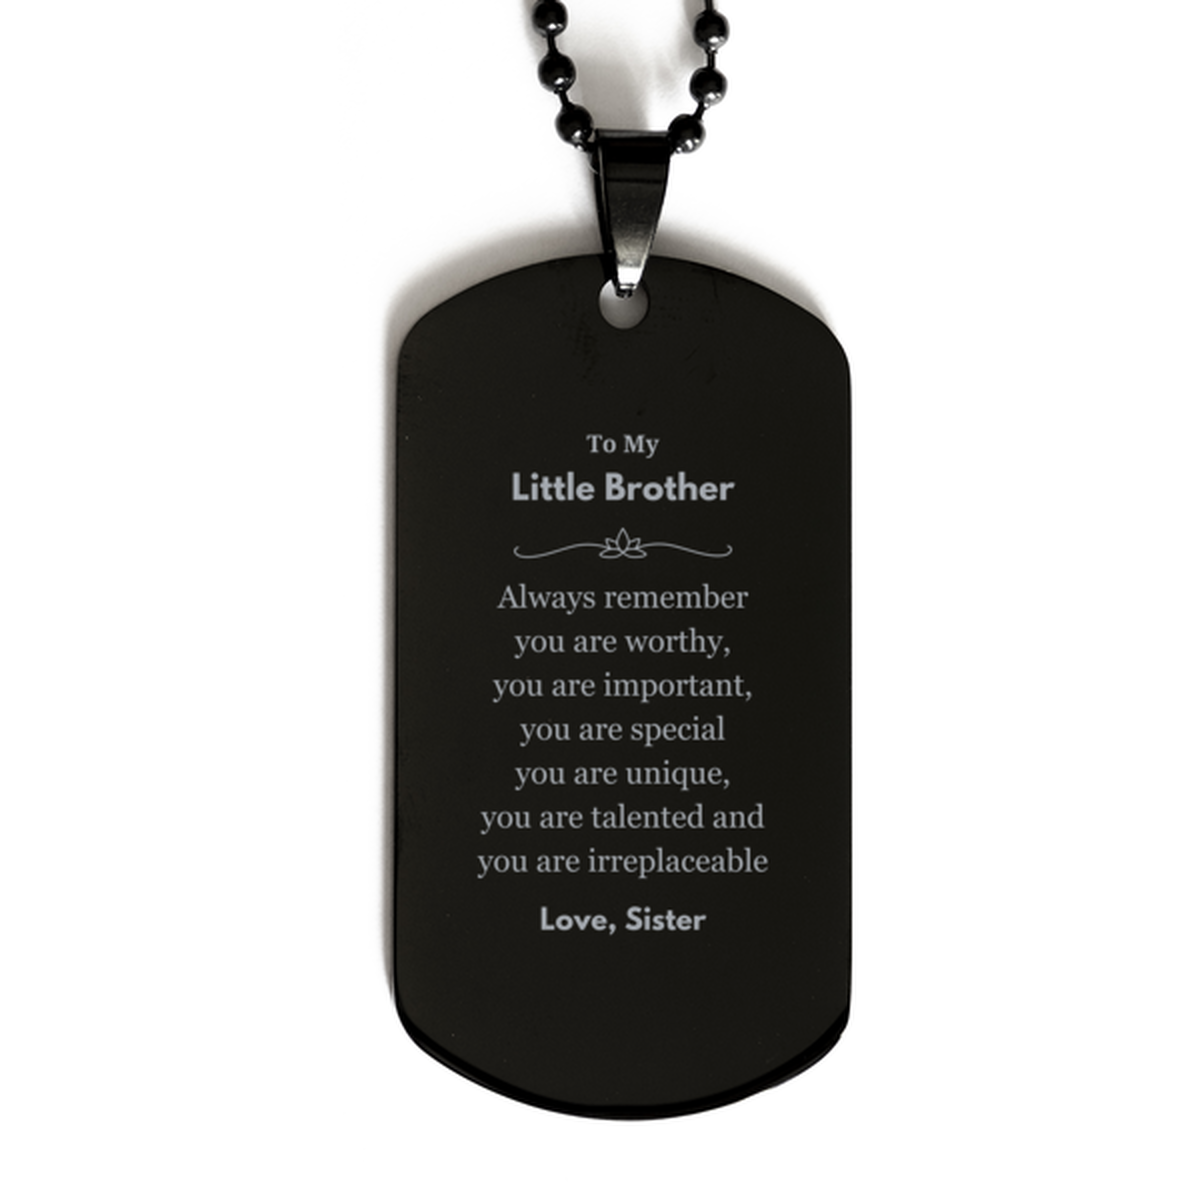 Little Brother Birthday Gifts from Sister, Inspirational Black Dog Tag for Little Brother Christmas Graduation Gifts for Little Brother Always remember you are worthy, you are important. Love, Sister